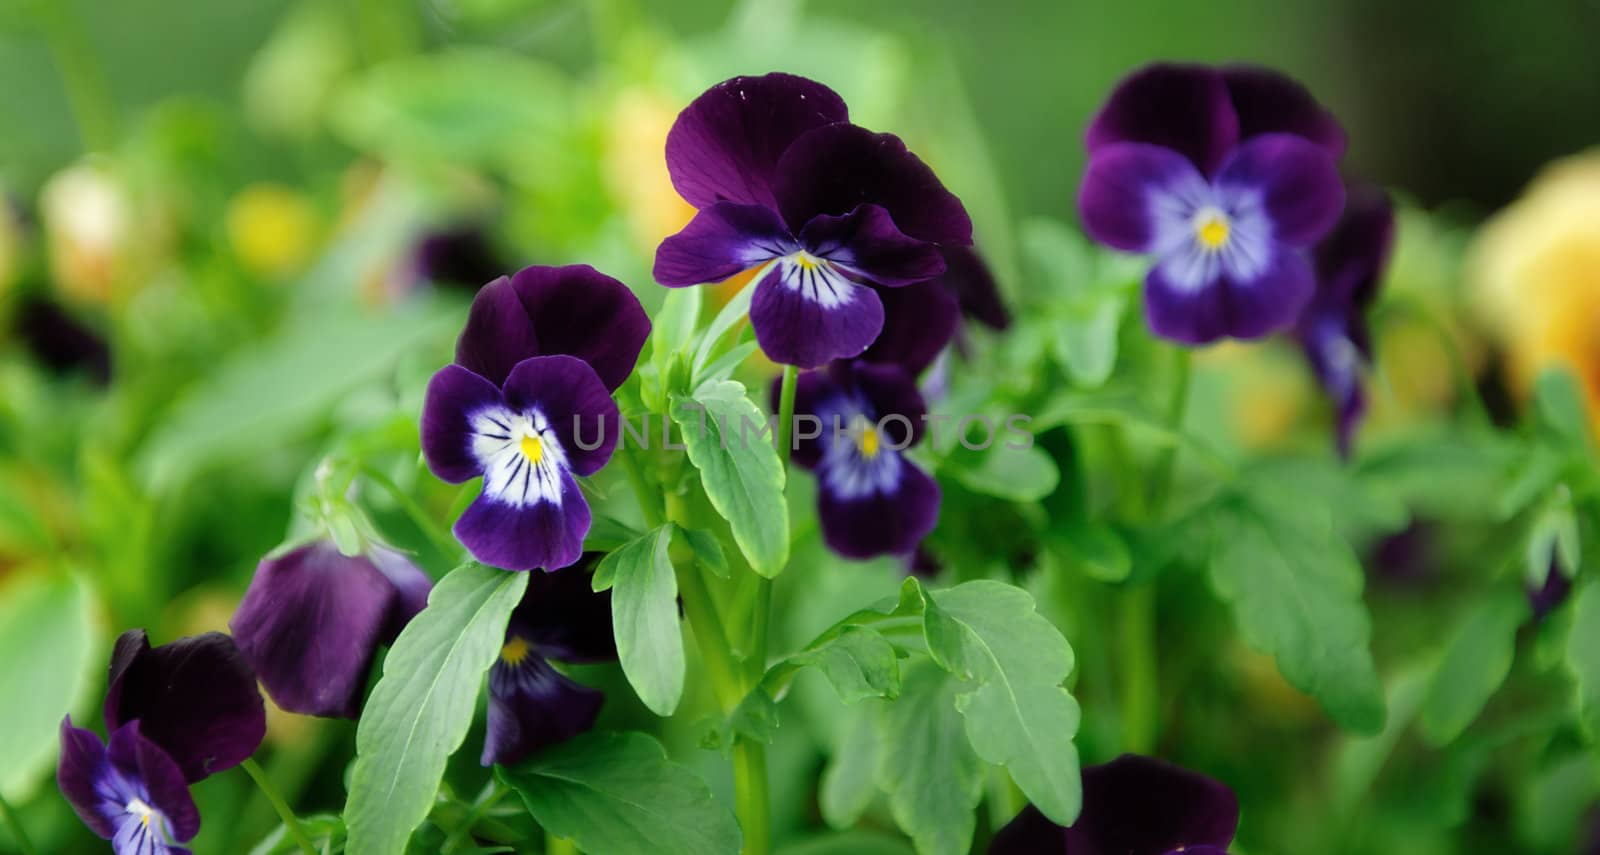 Purple Pansies also known as Viola Tricolor surrounded by greenery